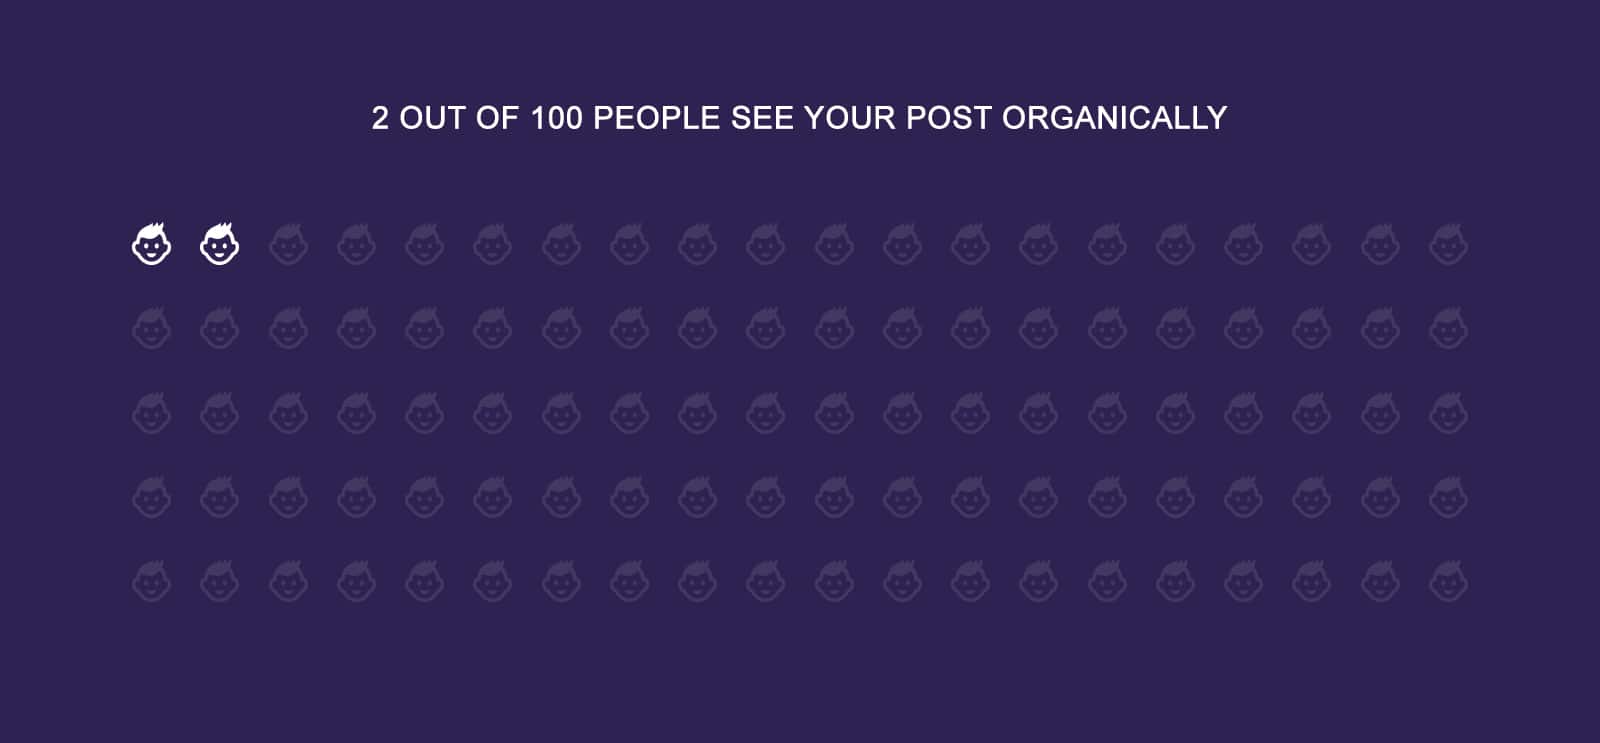 2 out of 100 people see your post organically